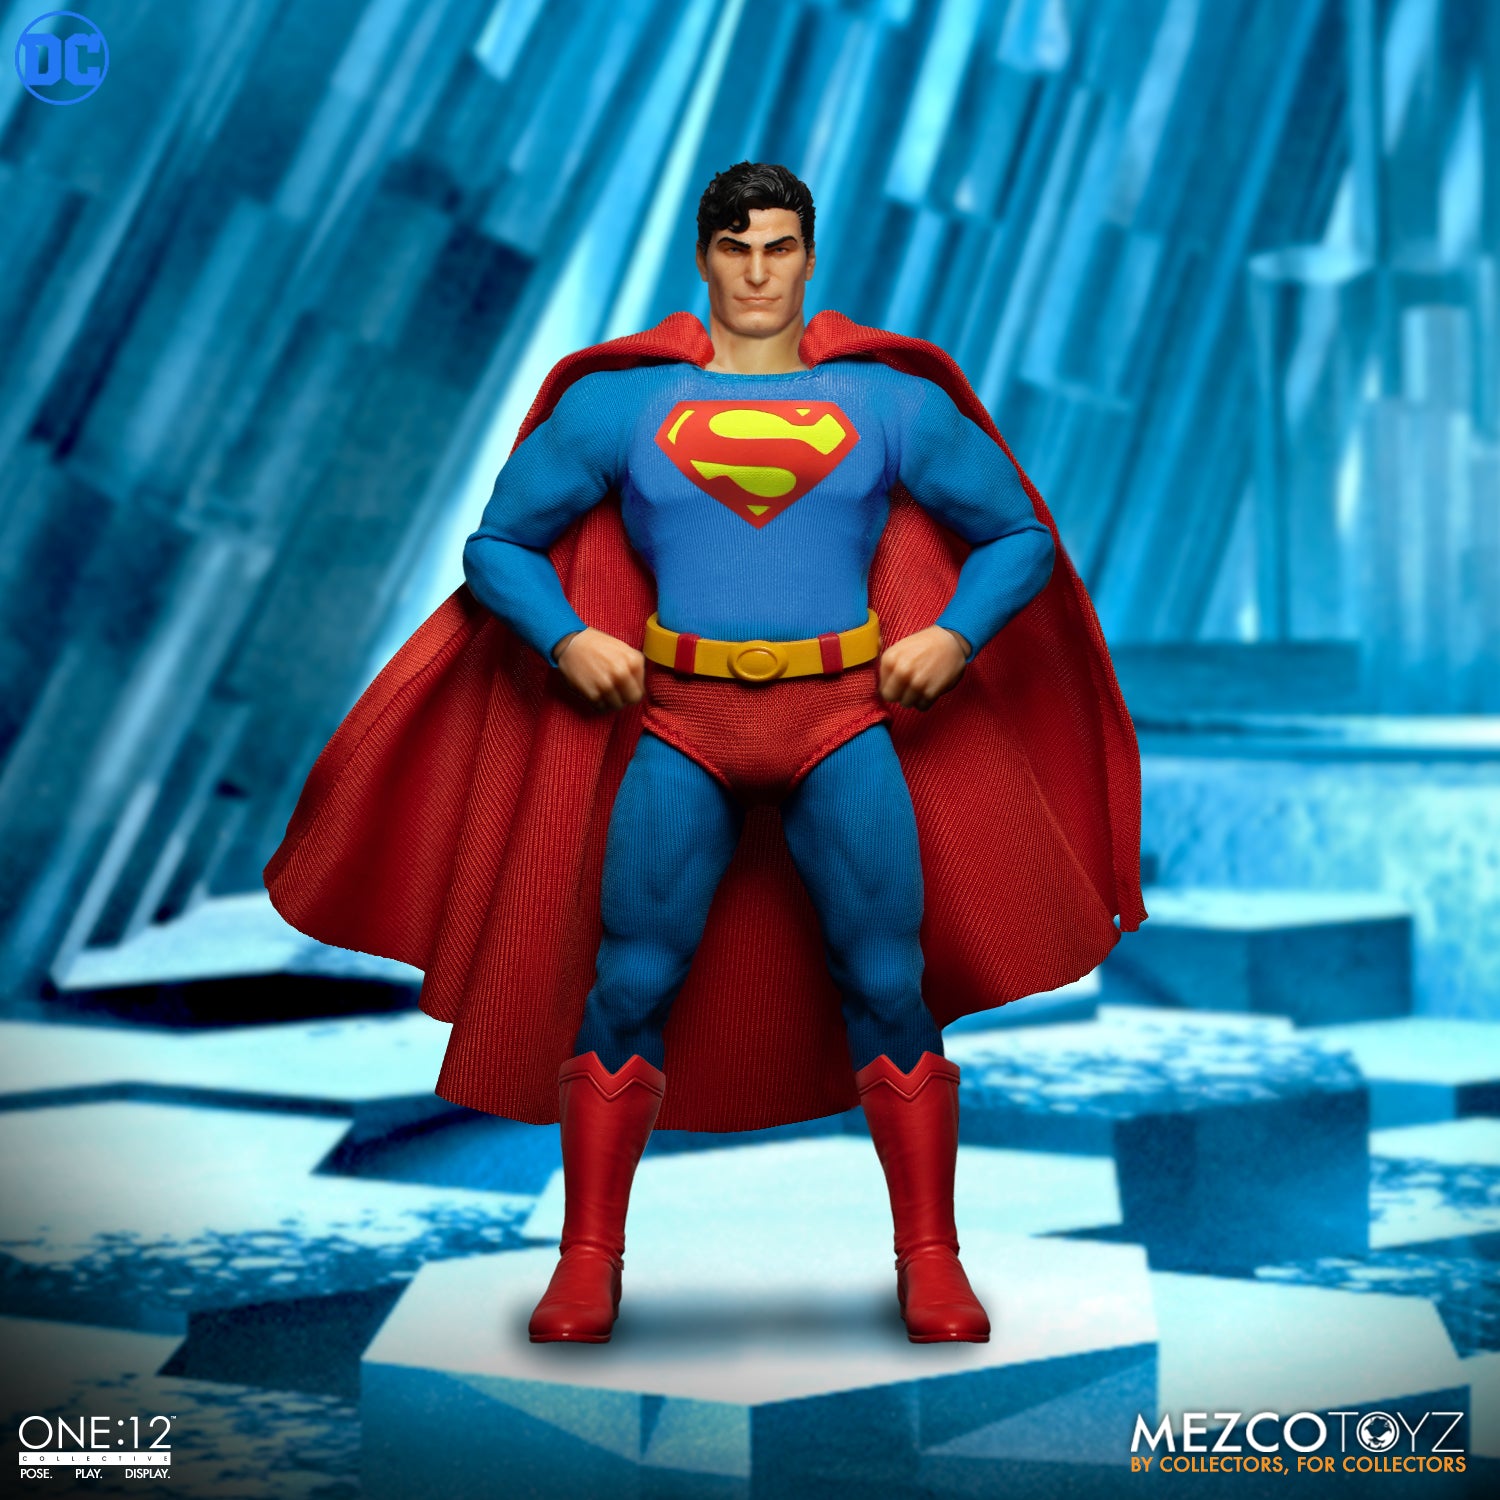 Superman Man of Steel Edition One:12 Collective Figure